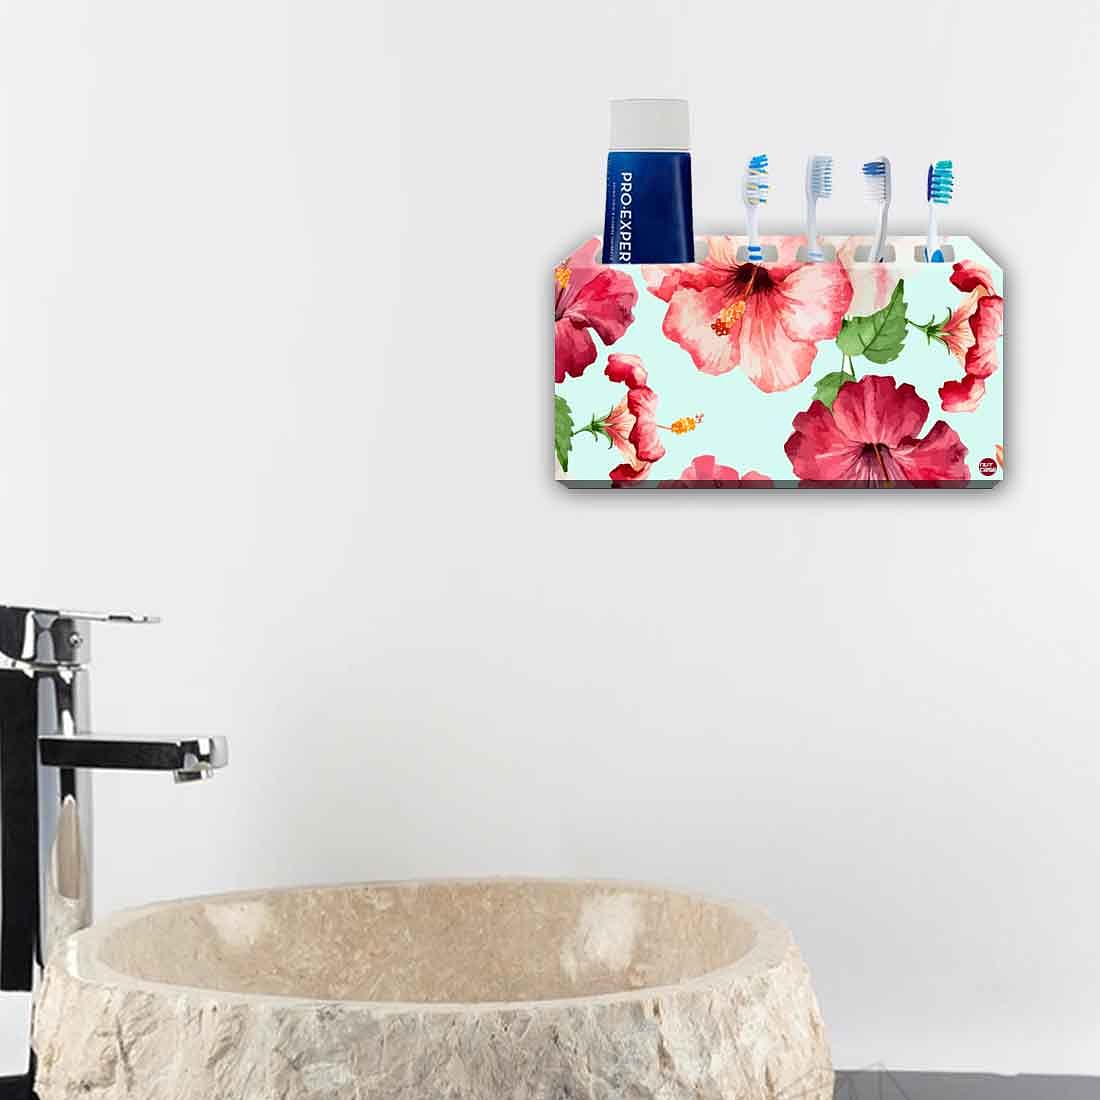 Toothbrush Holder Wall Mounted -Hibiscus with White Background Nutcase